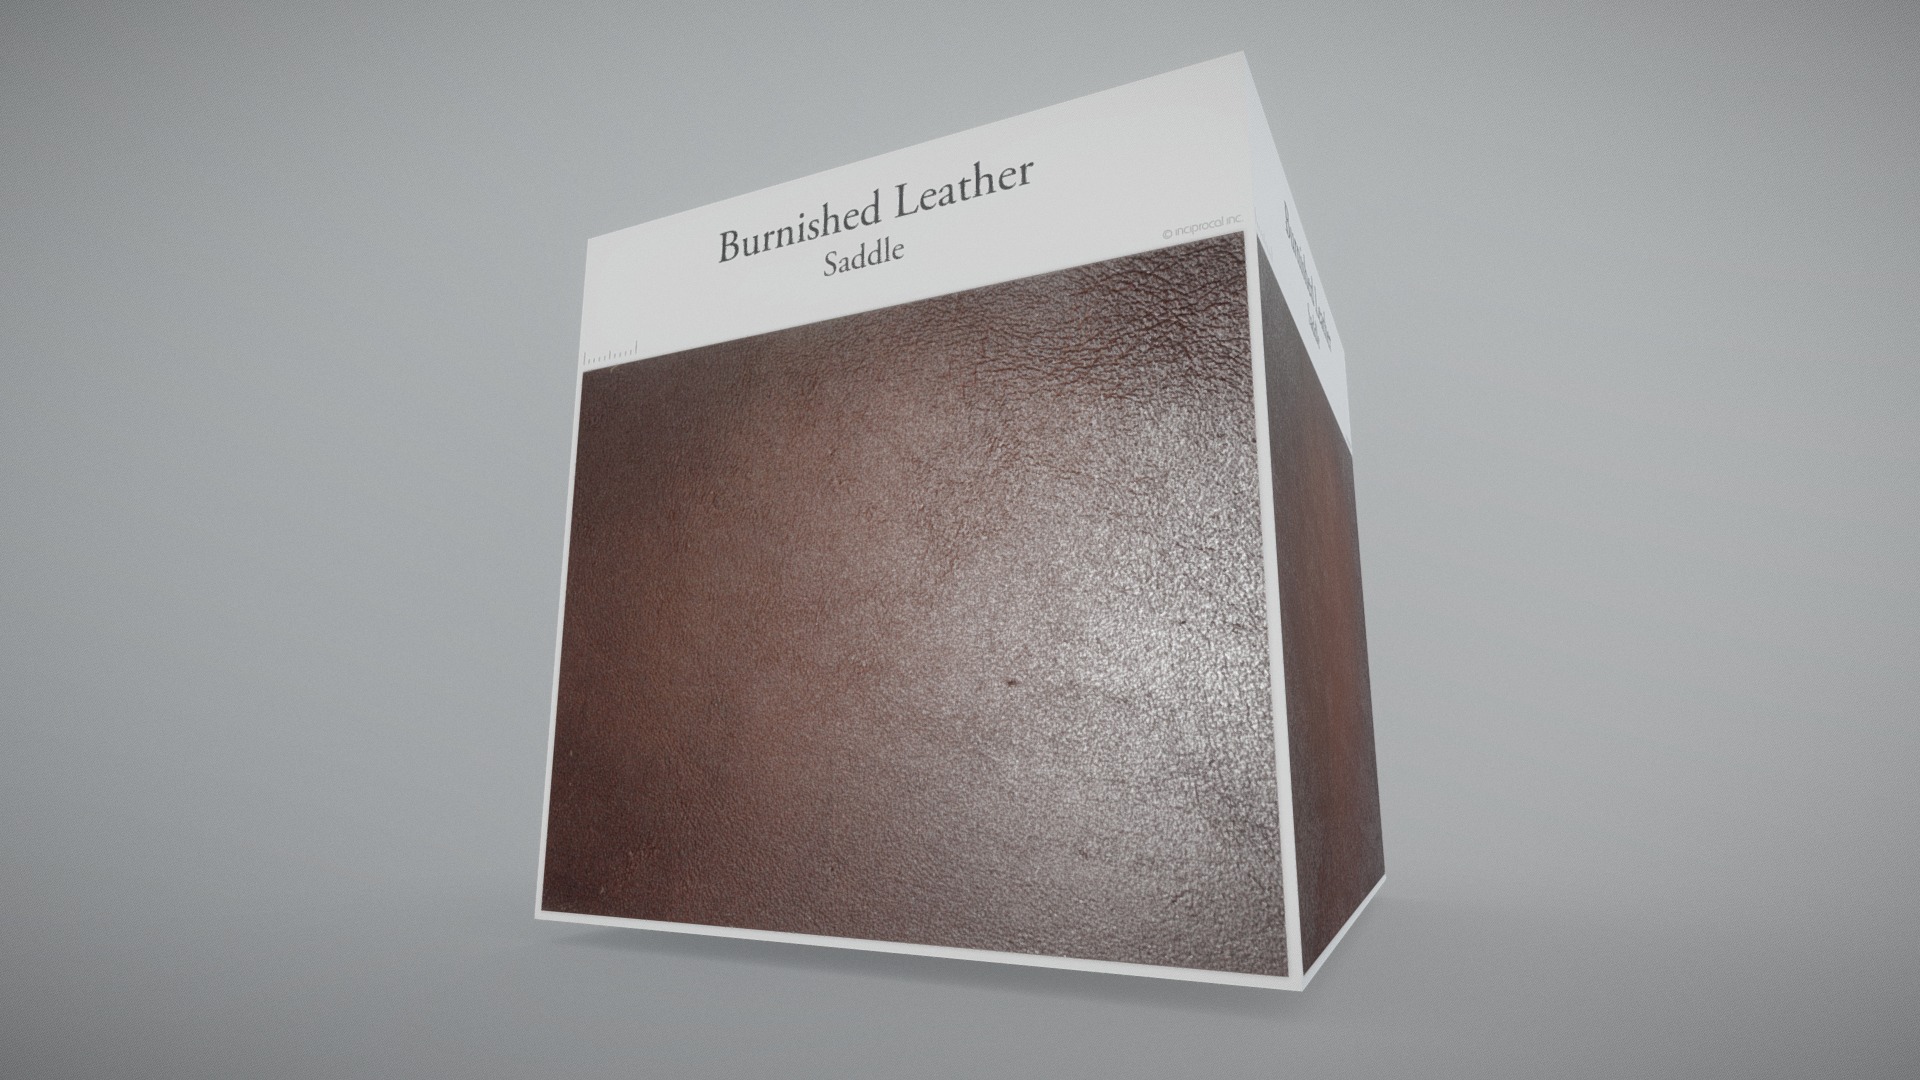 3D model Burnished Leather (Saddle) - This is a 3D model of the Burnished Leather (Saddle). The 3D model is about a book on a table.